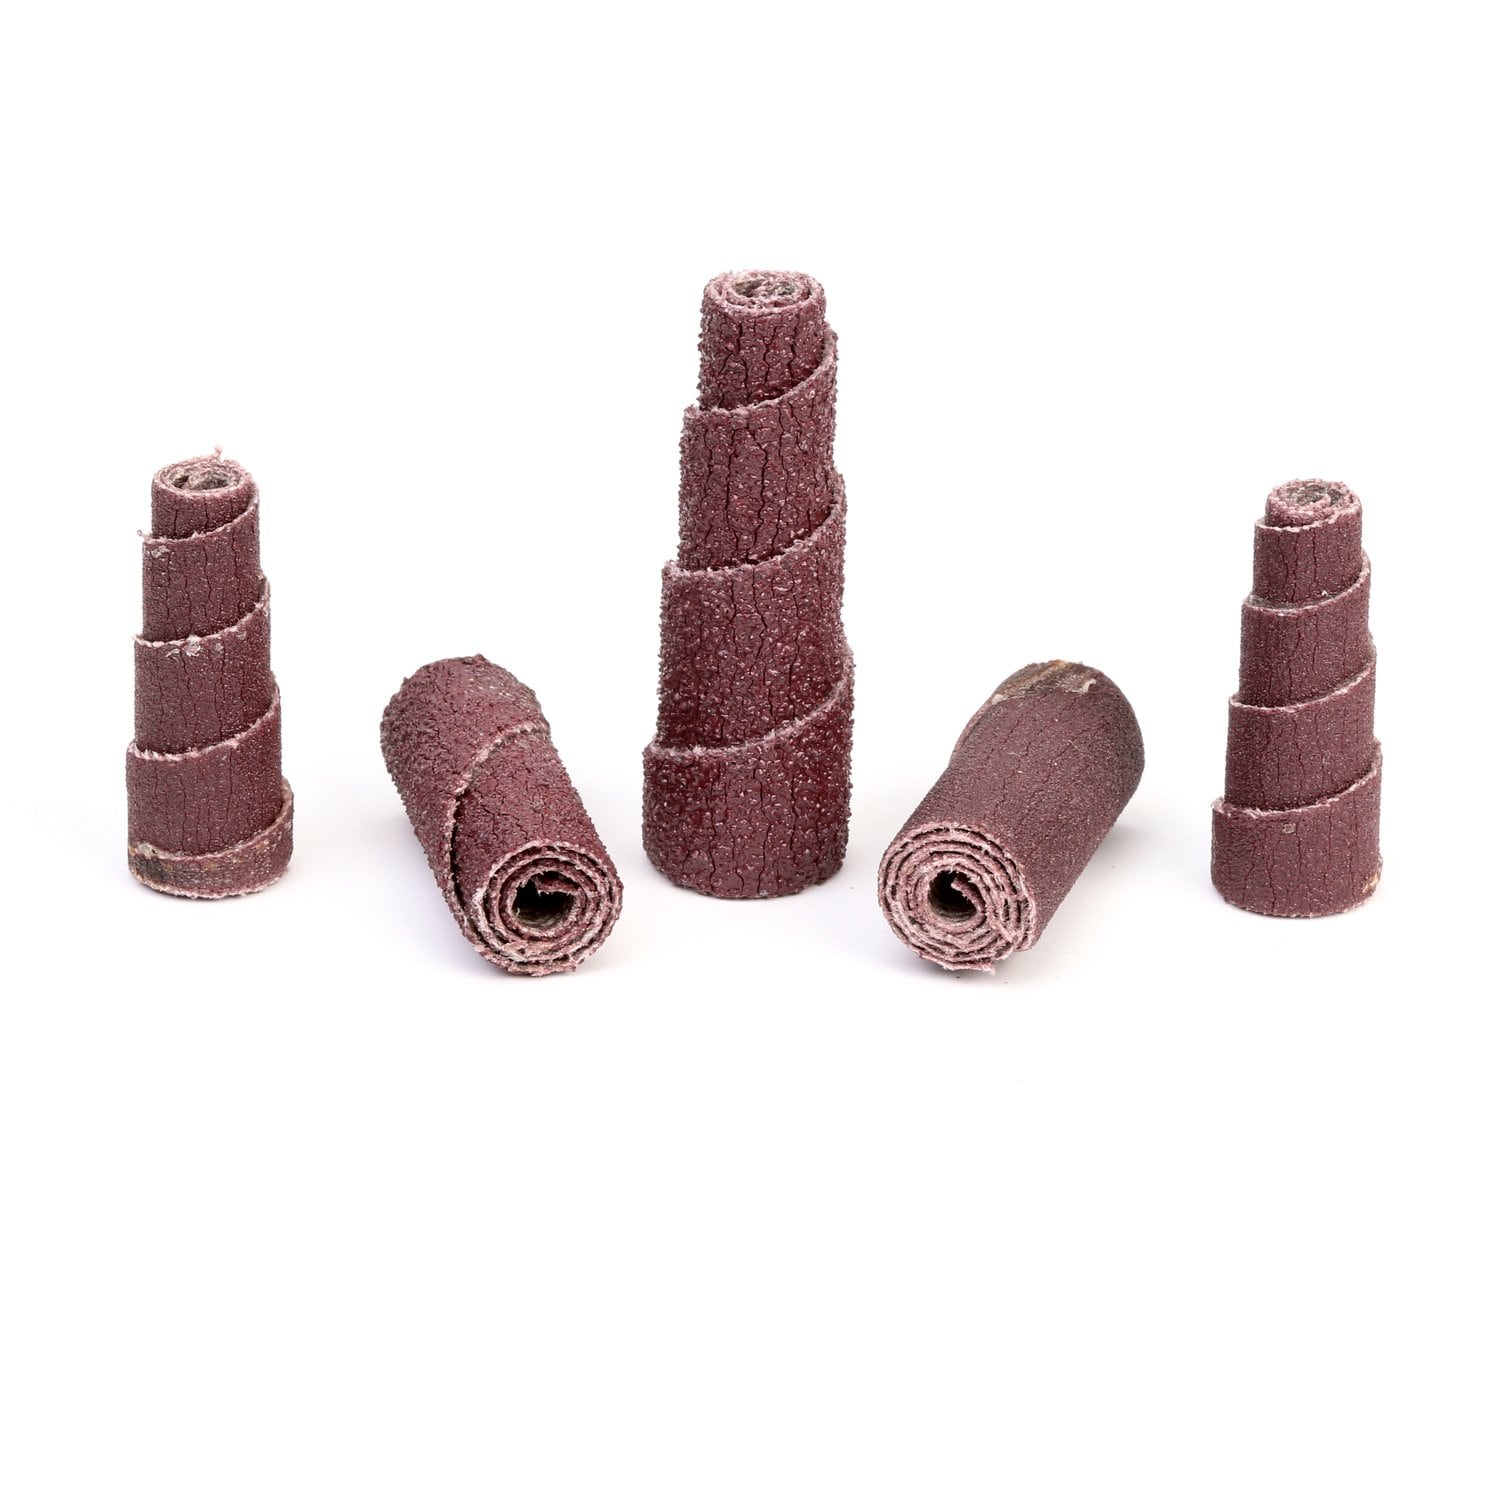 7100102021 - 3M Cartridge Roll 341D, CR-FT, 36 X-weight, 3/8 in x 1-1/2 in x 1/8 in,
Full Tapered, 100 ea/Case